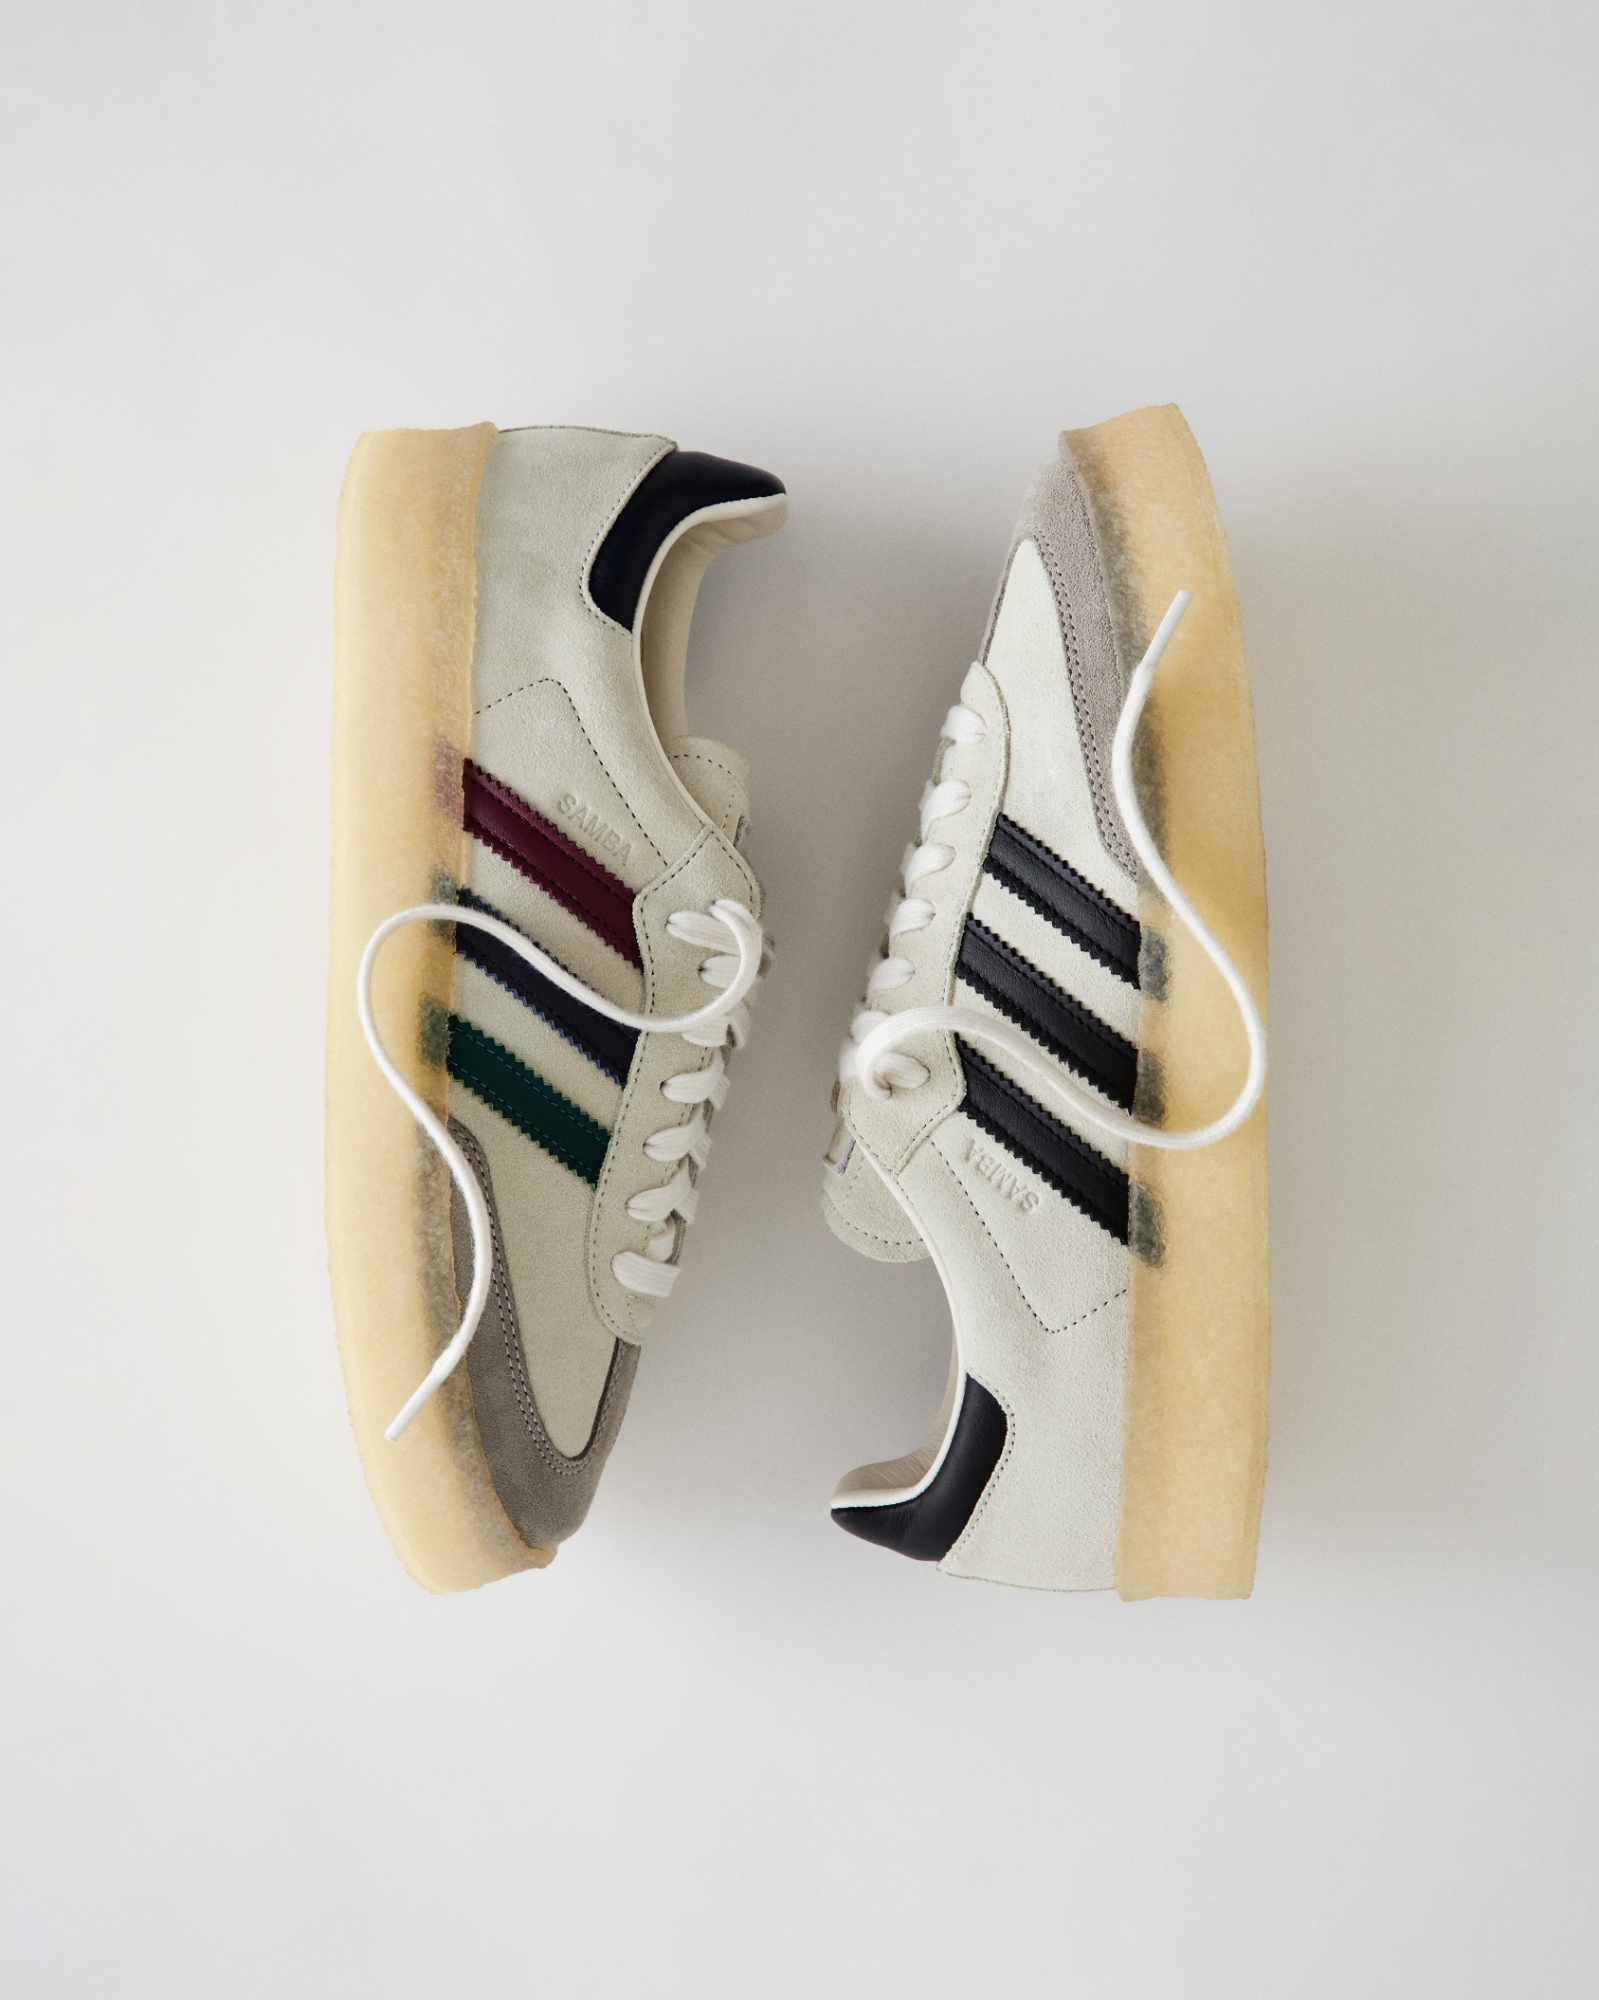 KITH x Clarks x adidas Samba sneakers in a black and white colorway